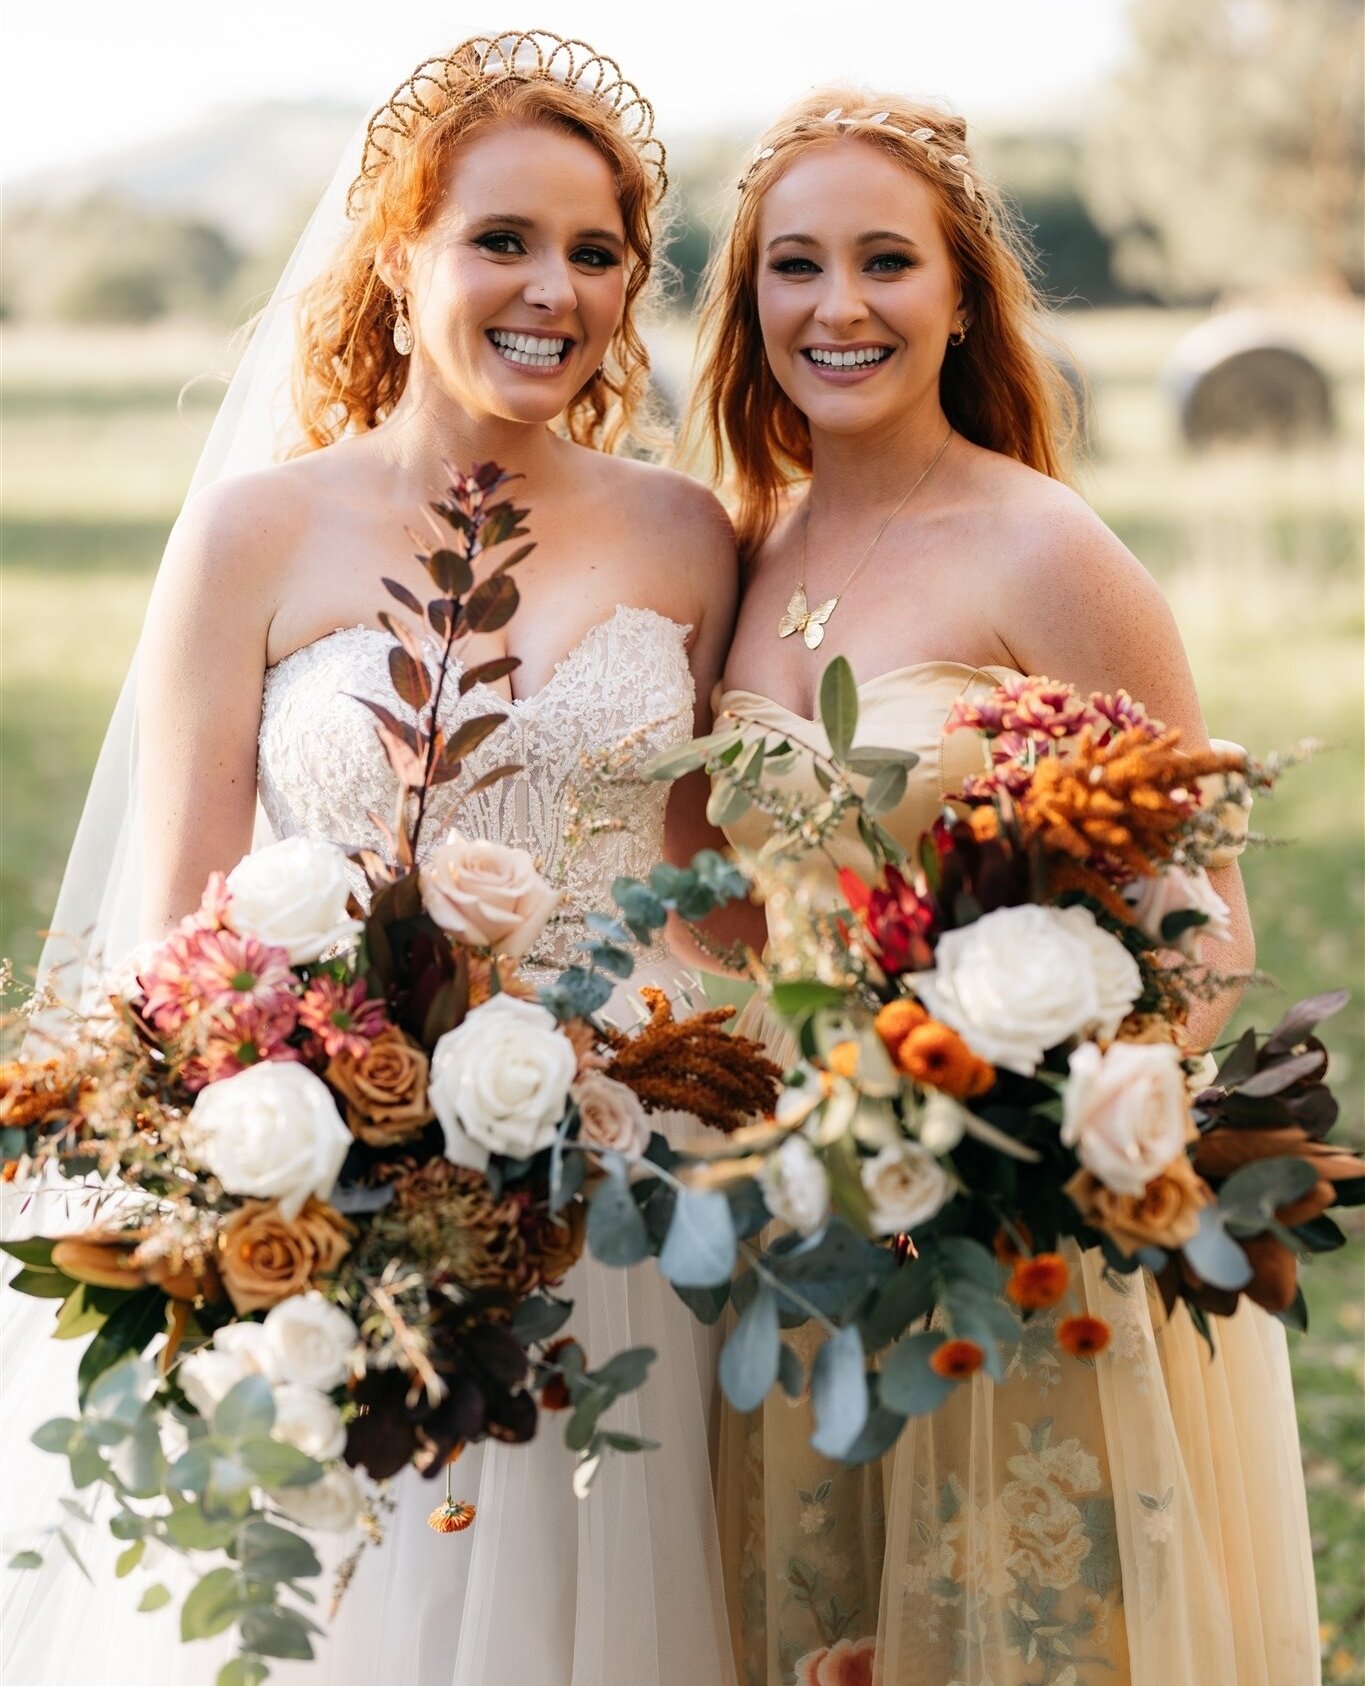 Stunning Bride Saskia and her Maid of Honour (and sister) with their pretty Autumnal bouquets we created for them.⁠
⁠
⁠
Full Supplier Credits:⁠
⁠
Venue @flowerdaleestate⁠
⁠
Celebrant @lisa.celebrant⁠
⁠
Photographer @rick_liston⁠
⁠
Videographer @mj_pr